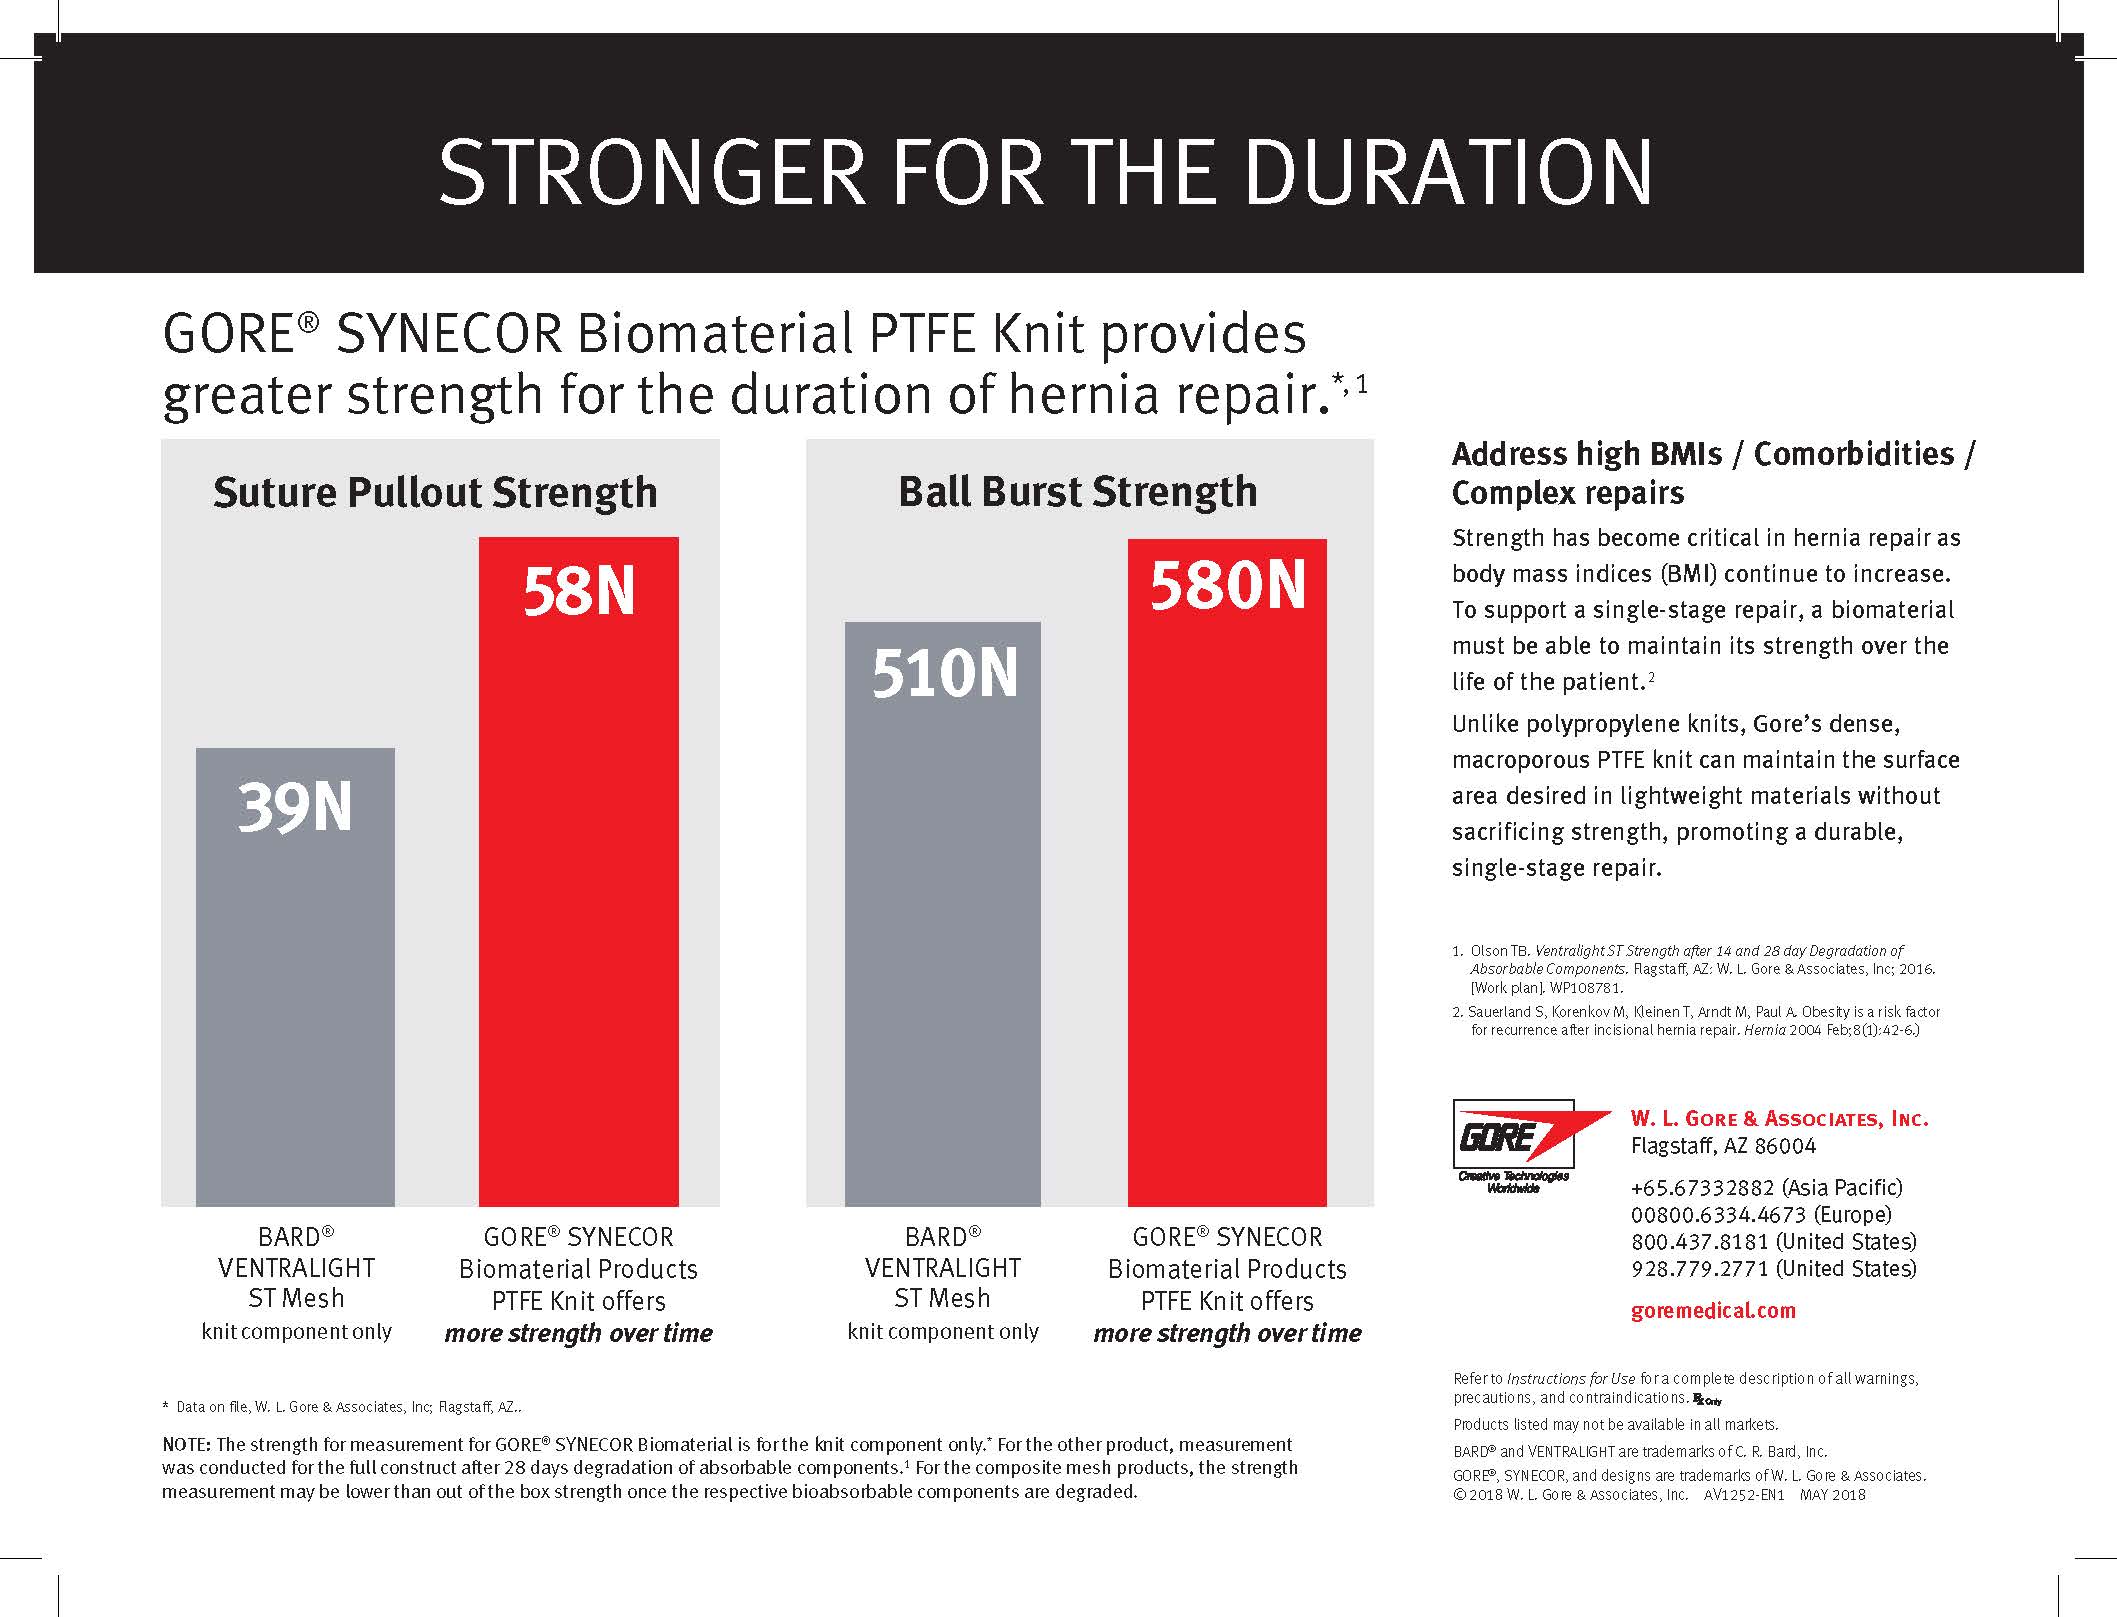 GORE® SYNECOR Biomaterial PTFE Knit provides greater strength for the duration of hernia repair